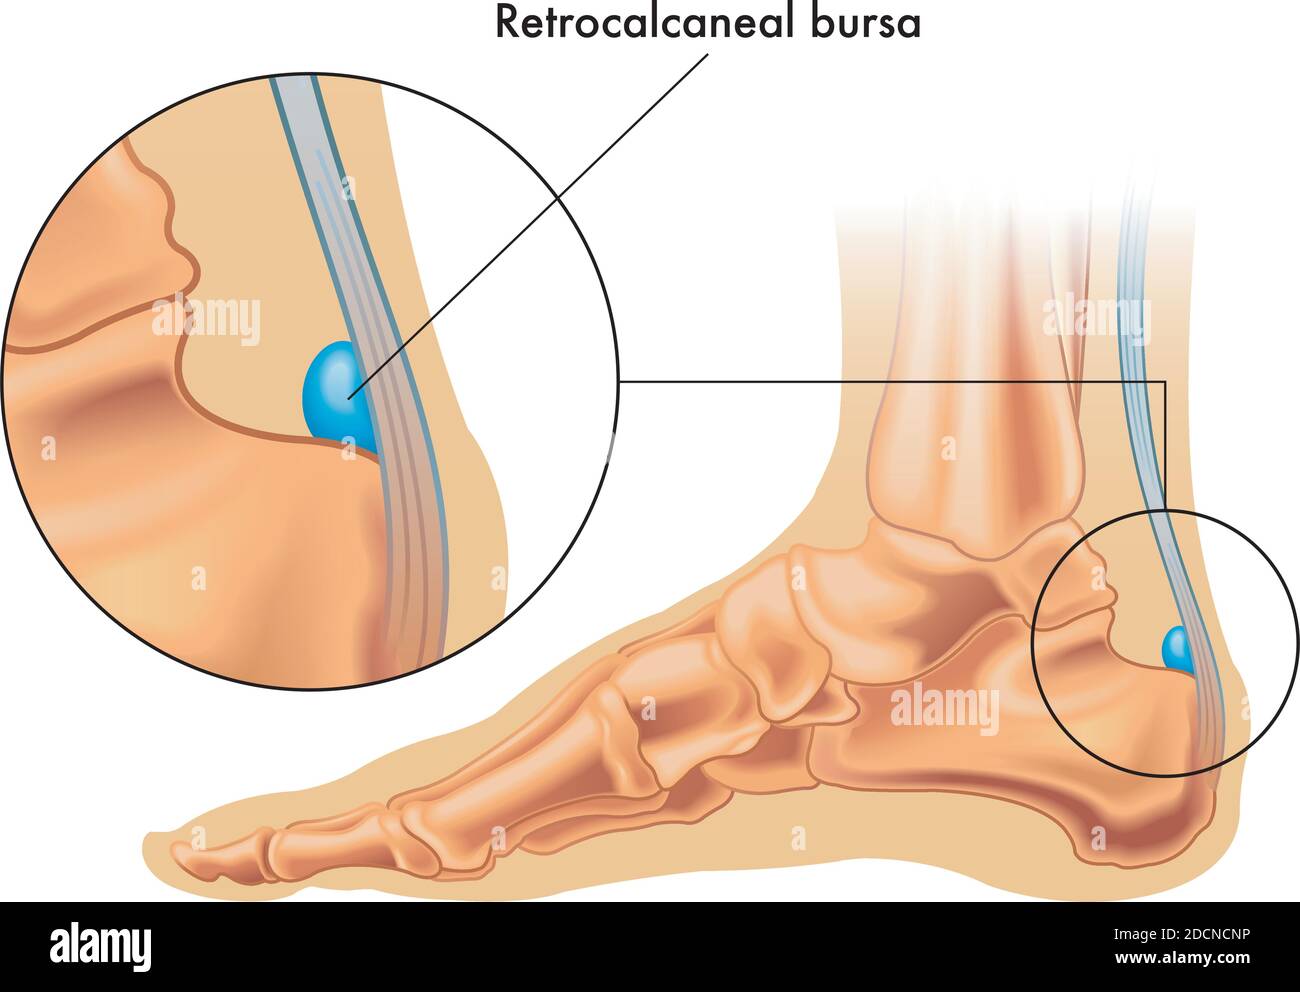 Illustration showing the position of the retrocalcaneal bursa in the foot, with an enlarged detail, and annotation. Stock Vector